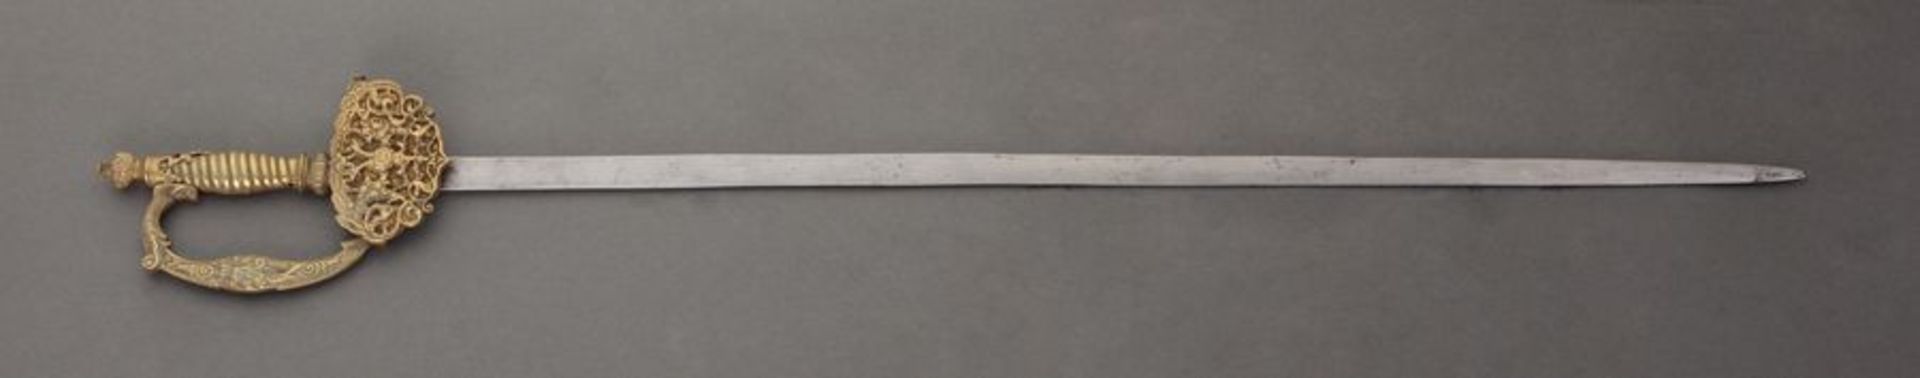 Sword of Russian civil and court of cials based on the version of 1855, without a [...]